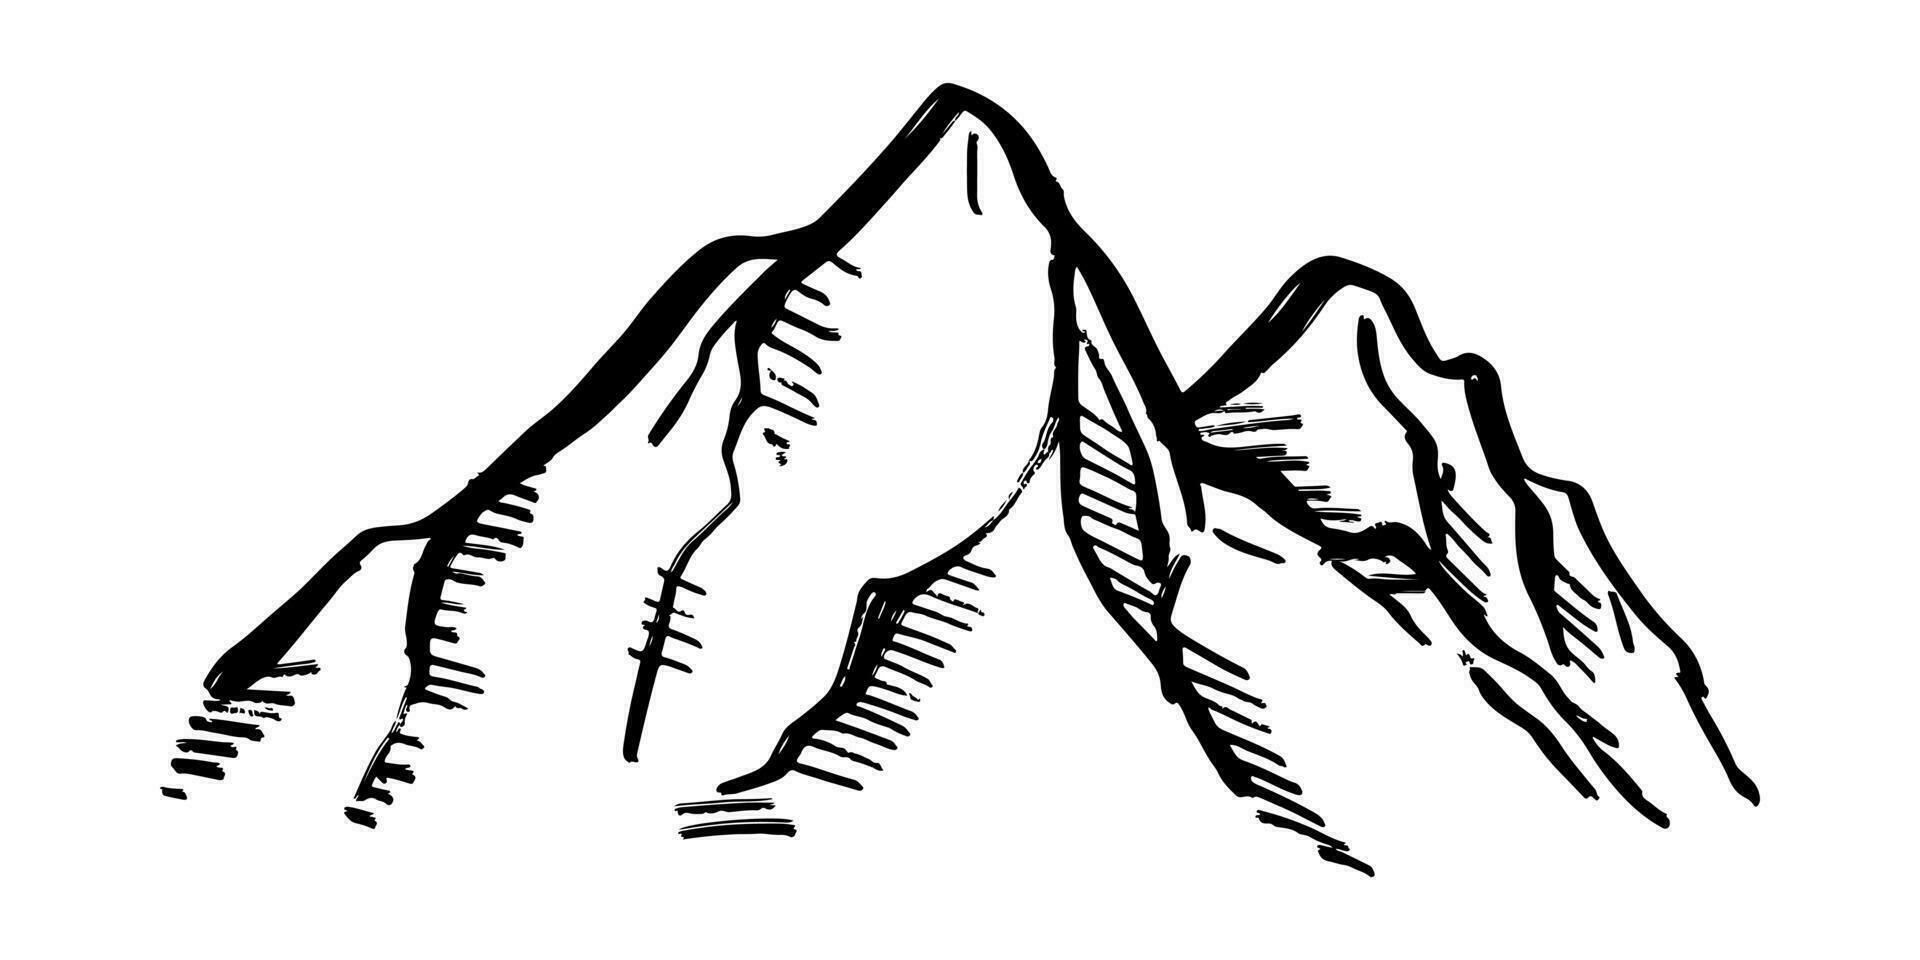 Doodle sketch style of Mountain vector illustration for concept design.